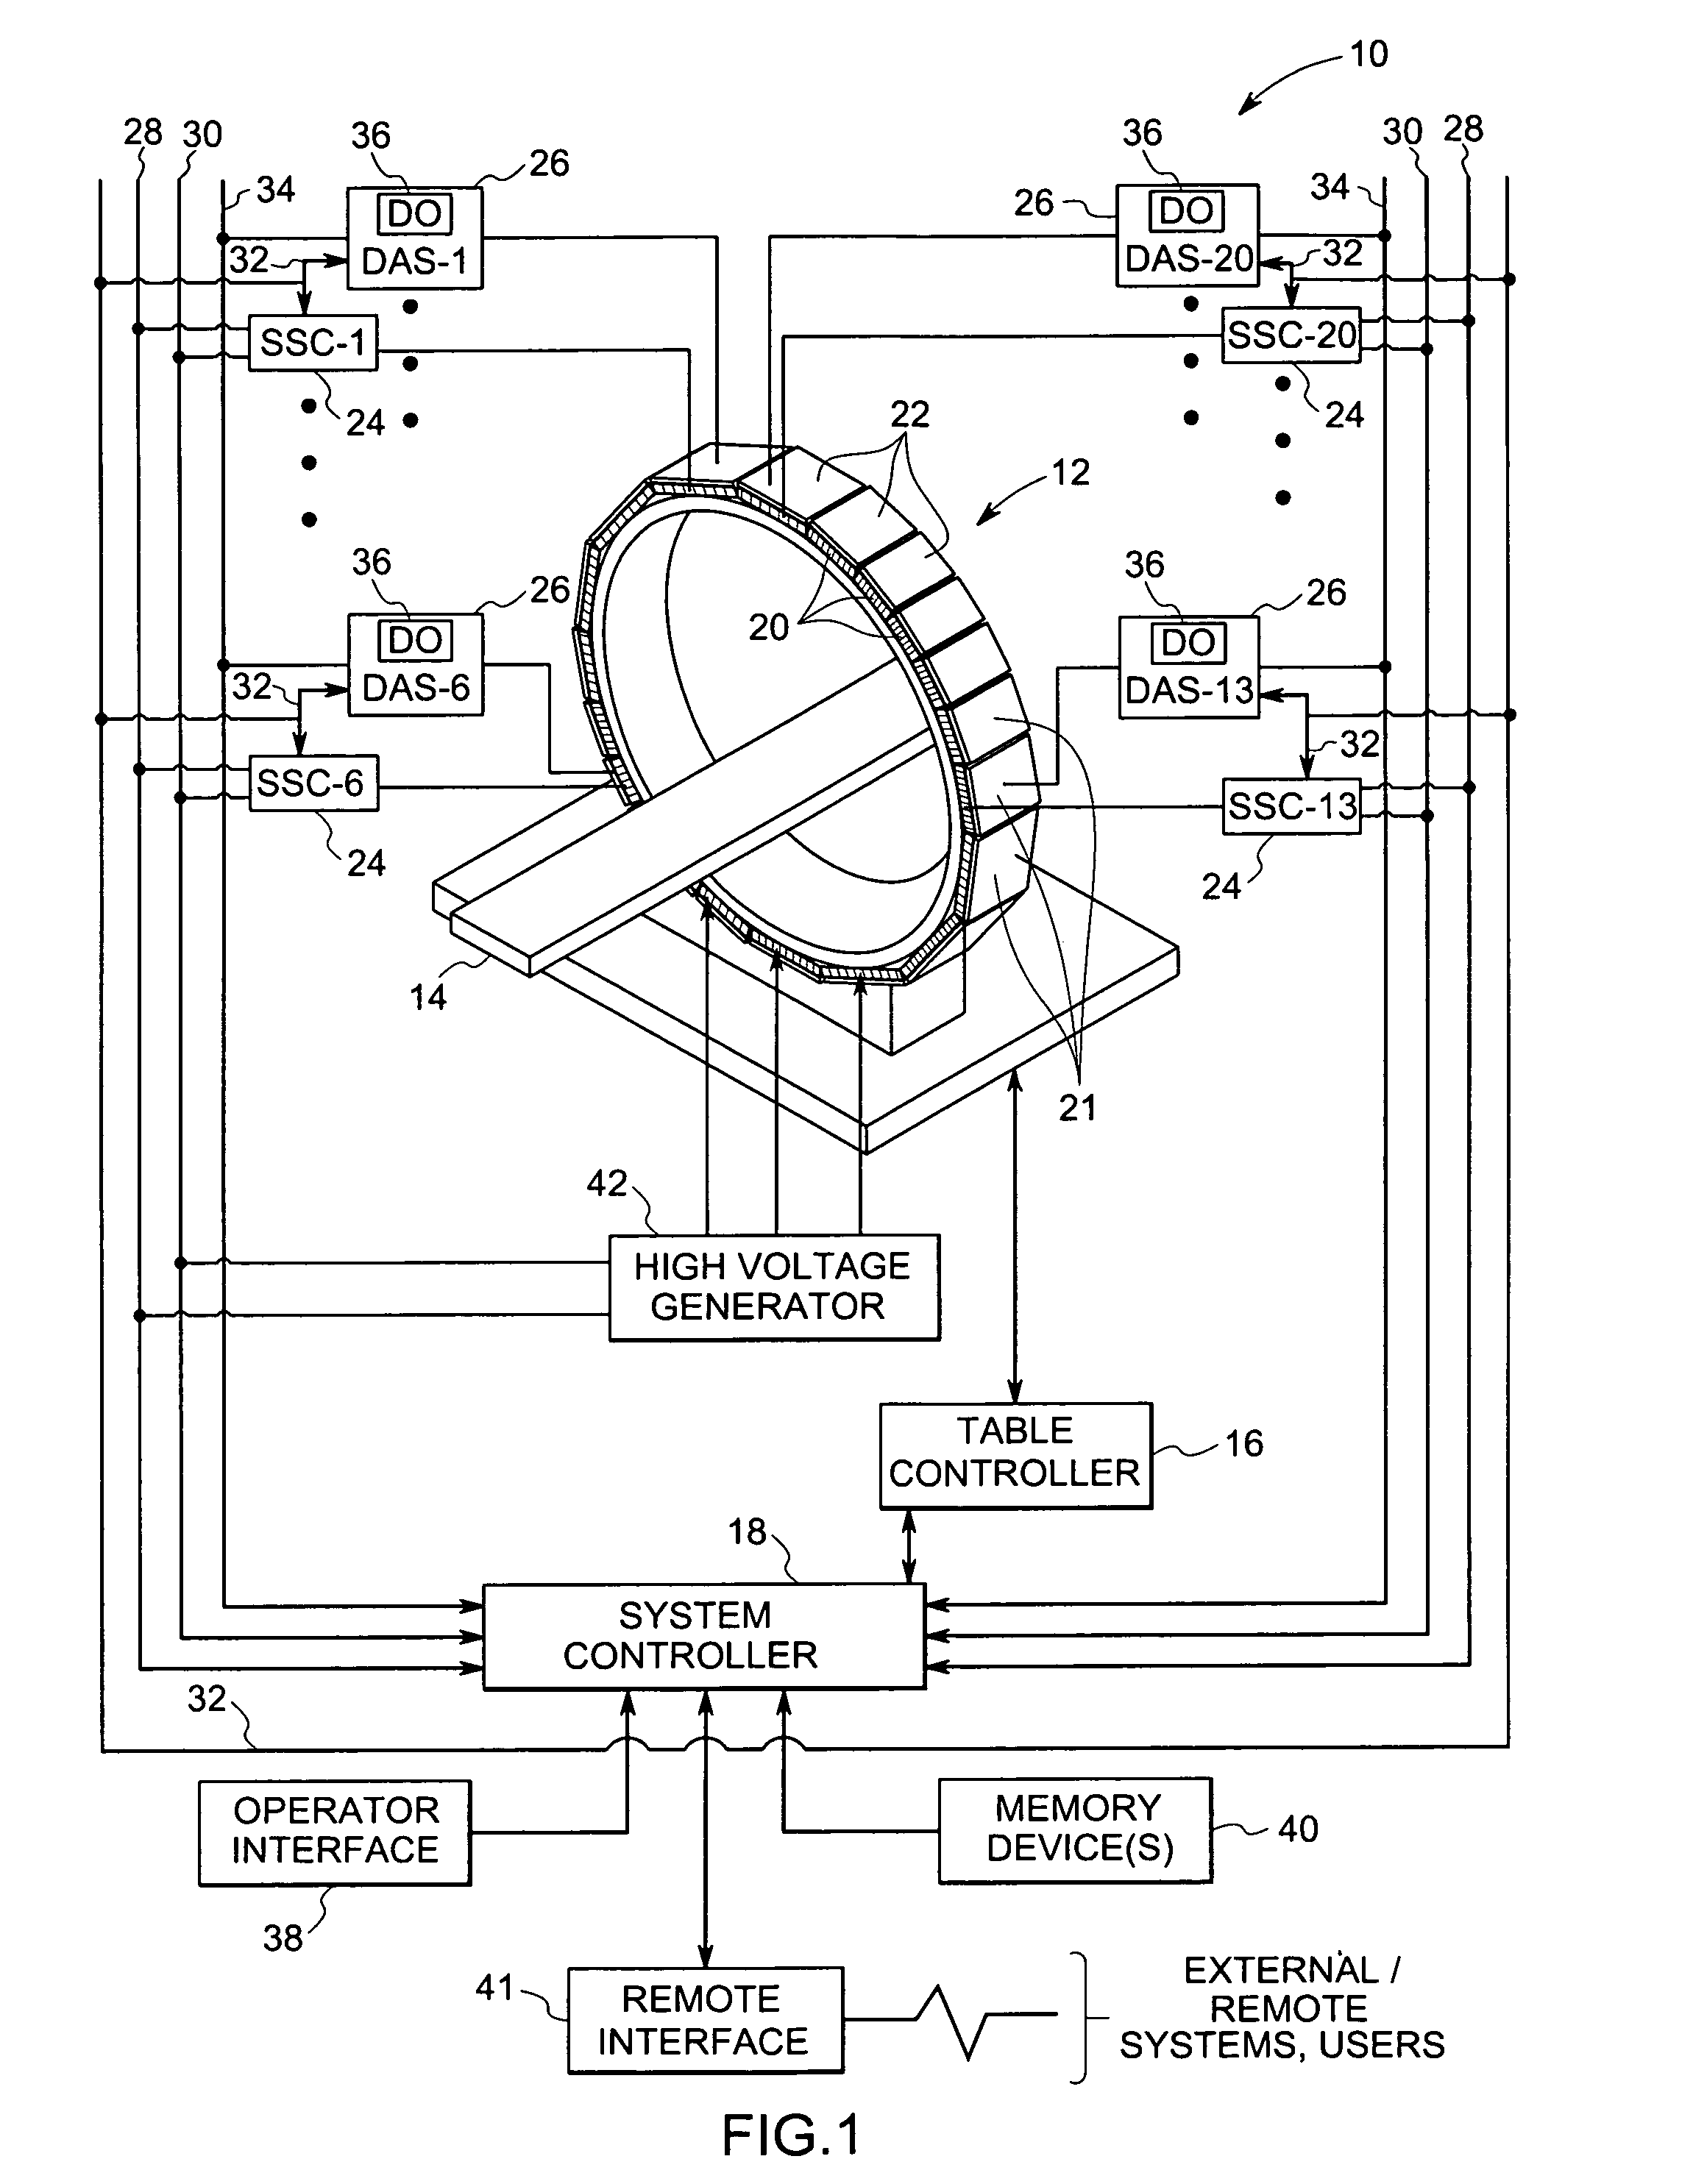 Stationary computed tomography system and method